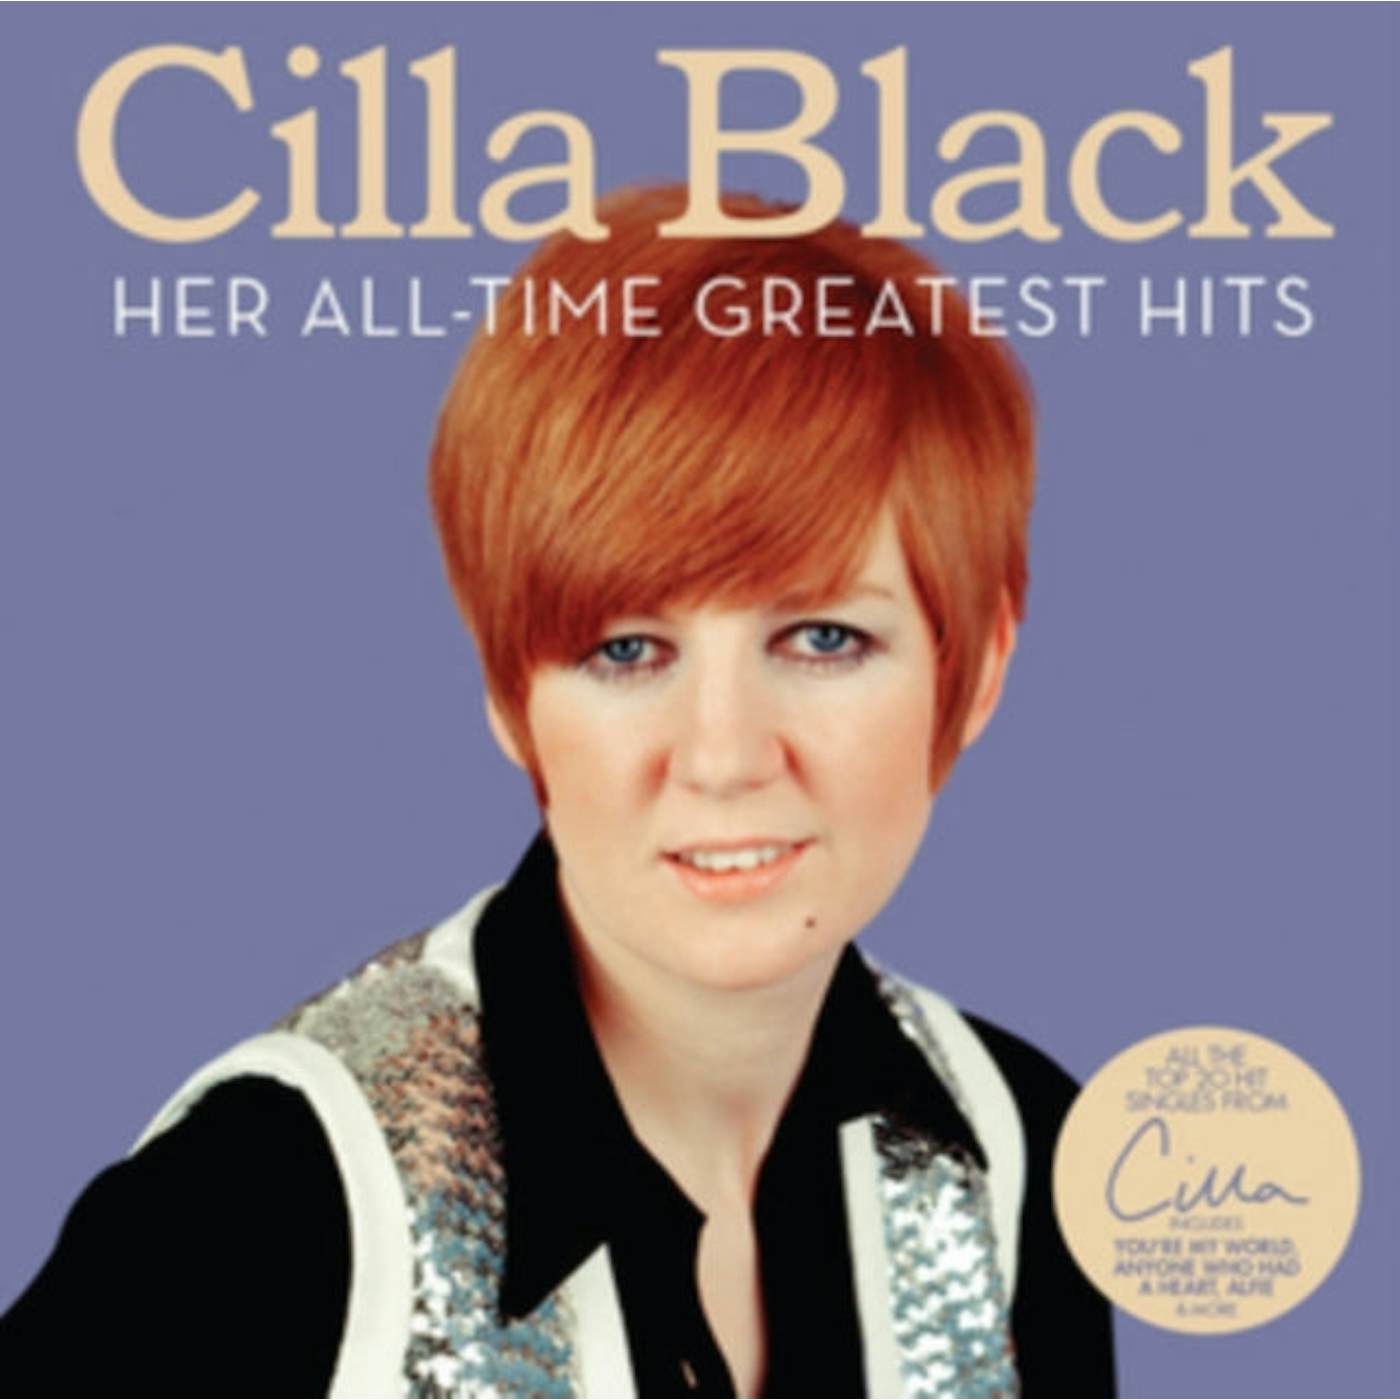 Cilla Black CD - Her All-Time Greatest Hits